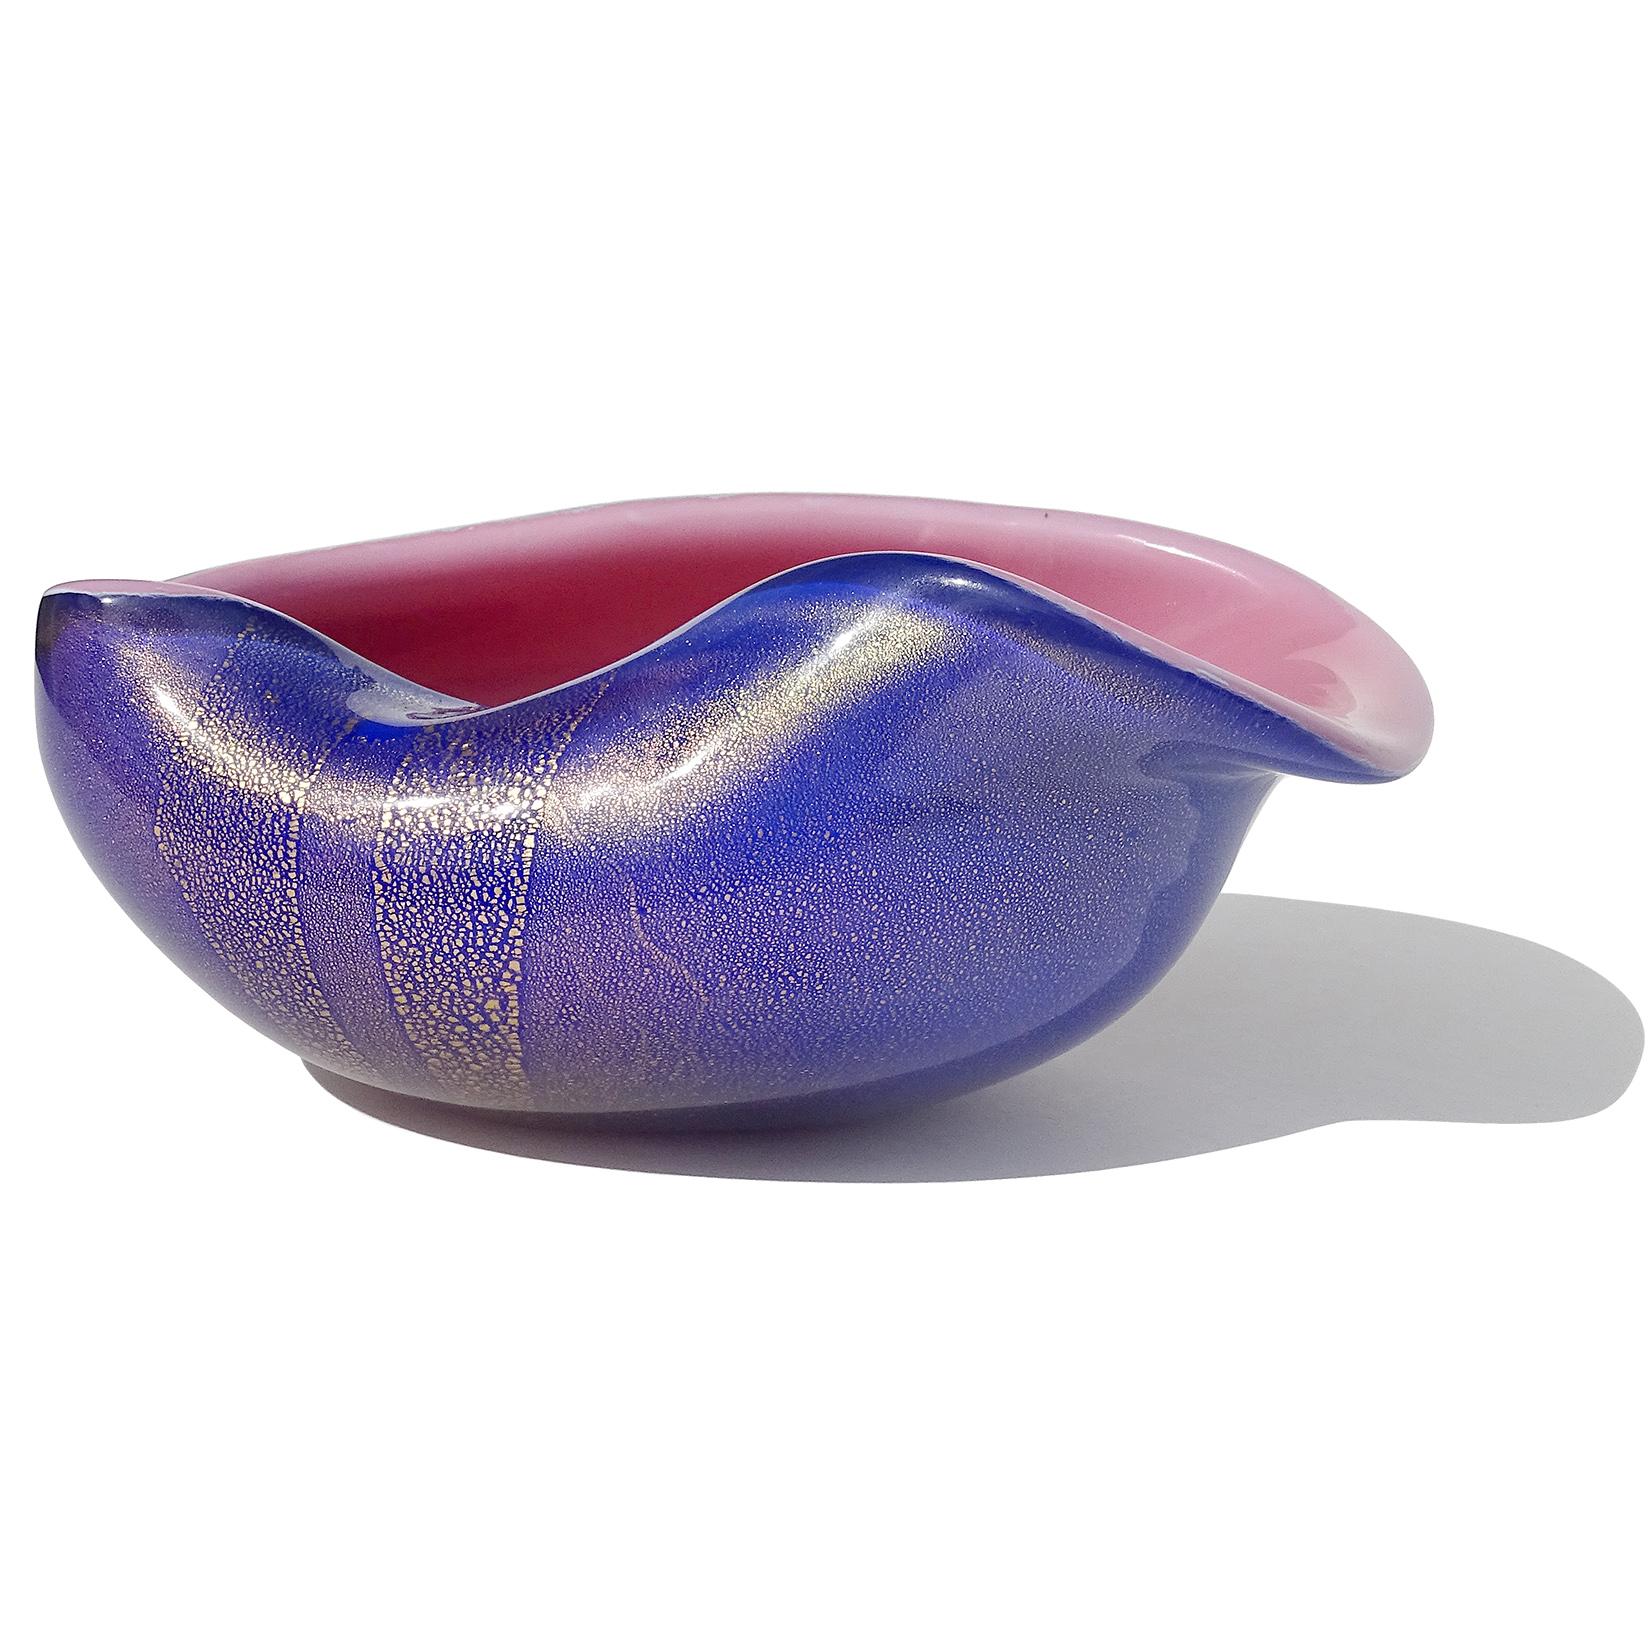 Beautiful vintage Murano hand blown cobalt blue over bright pink, and gold flecks, Italian art glass decorative bowl. Documented to designer Archimede Seguso, in the 